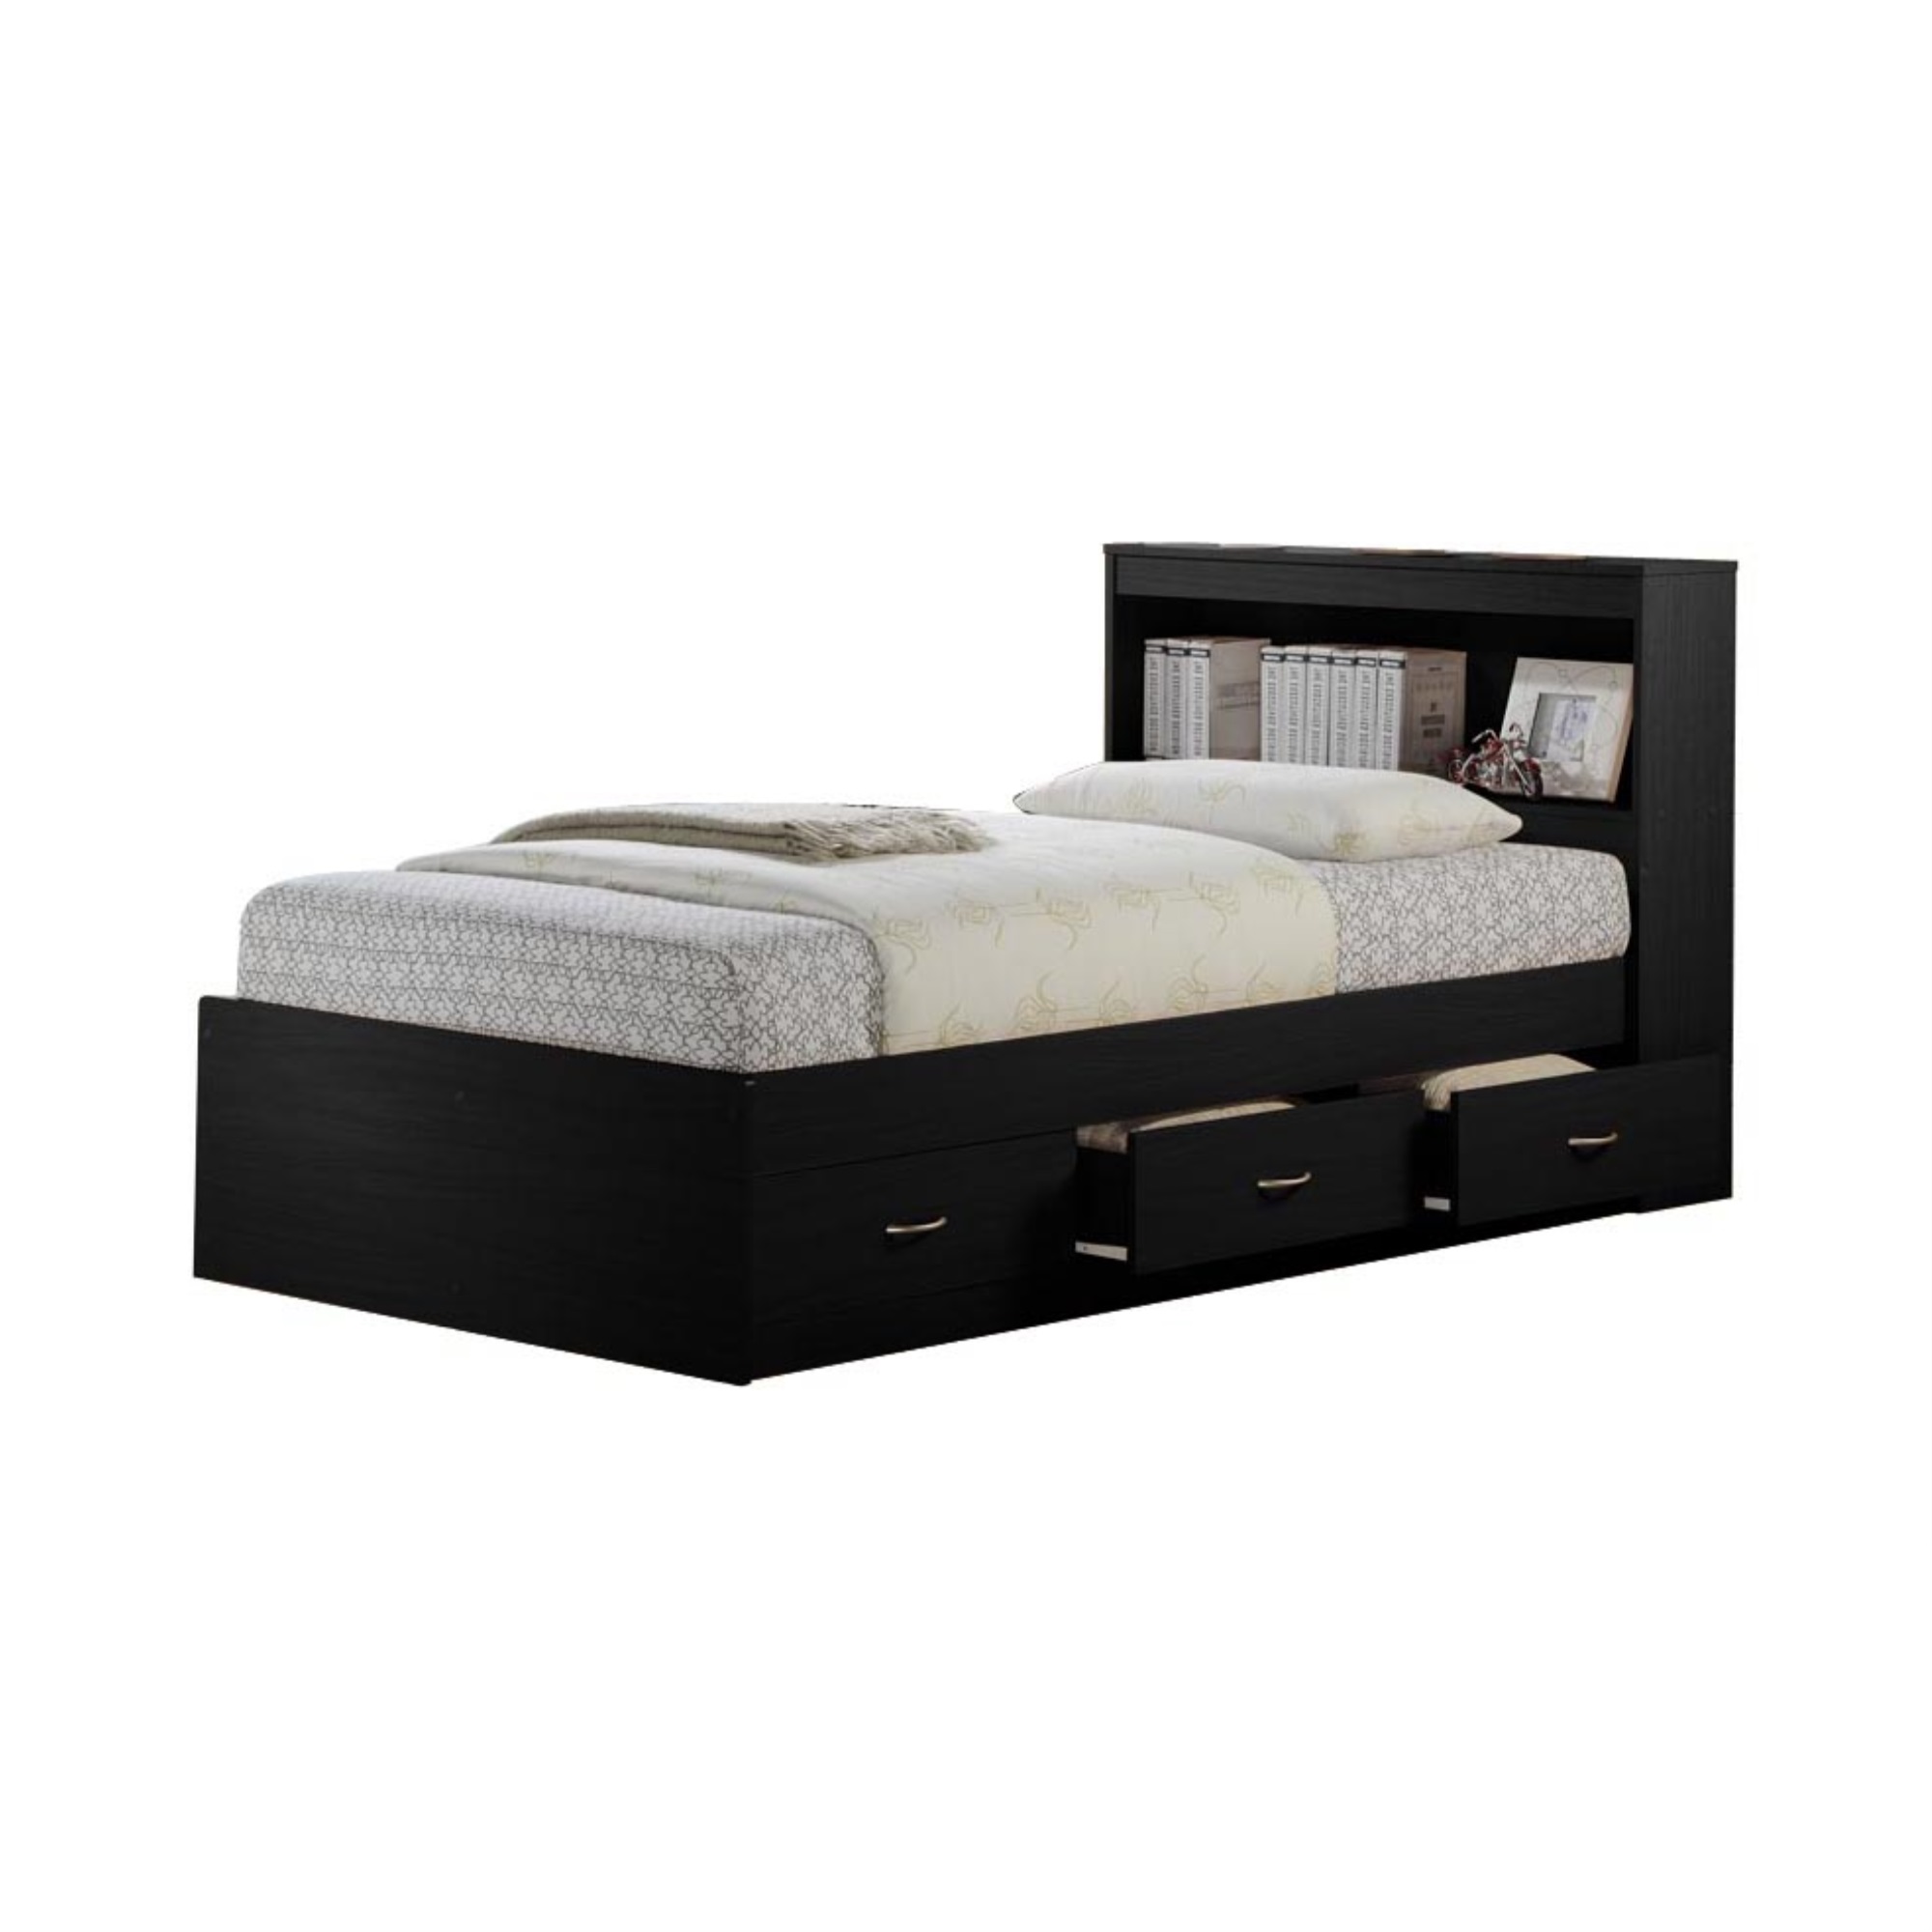 Hodedah HIBT60 BLACK Twin-Size Captain Bed with 3-Drawers & Headboard - Black